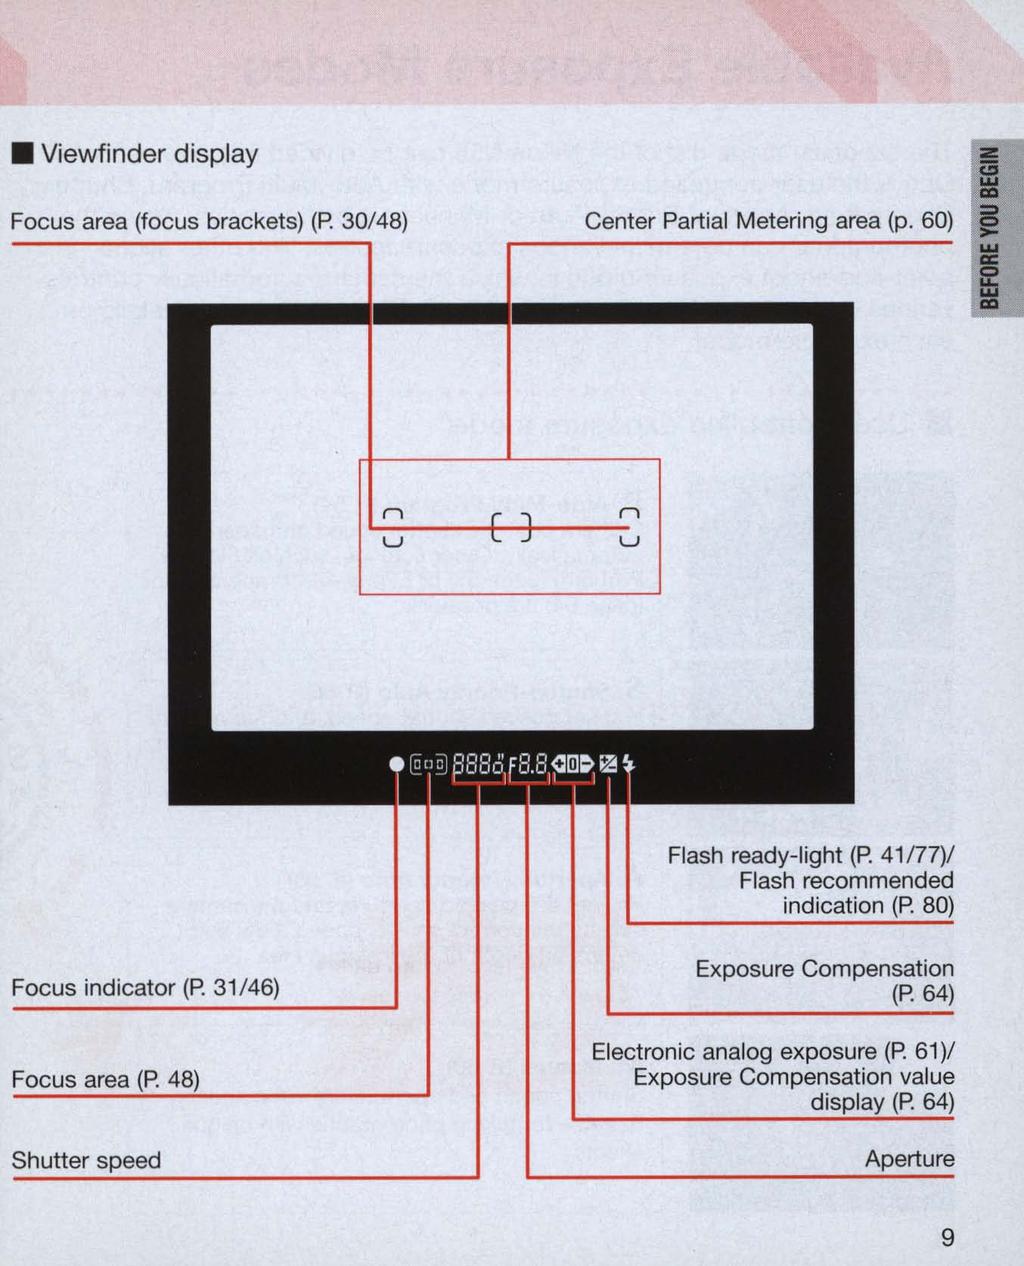 Viewfinder display Focus area (focus brackets) (P. 30/48) Center Partial Metering area (p. 60) I i I Flash ready-light (P. 41n7)/ Flash recommended indication (P.